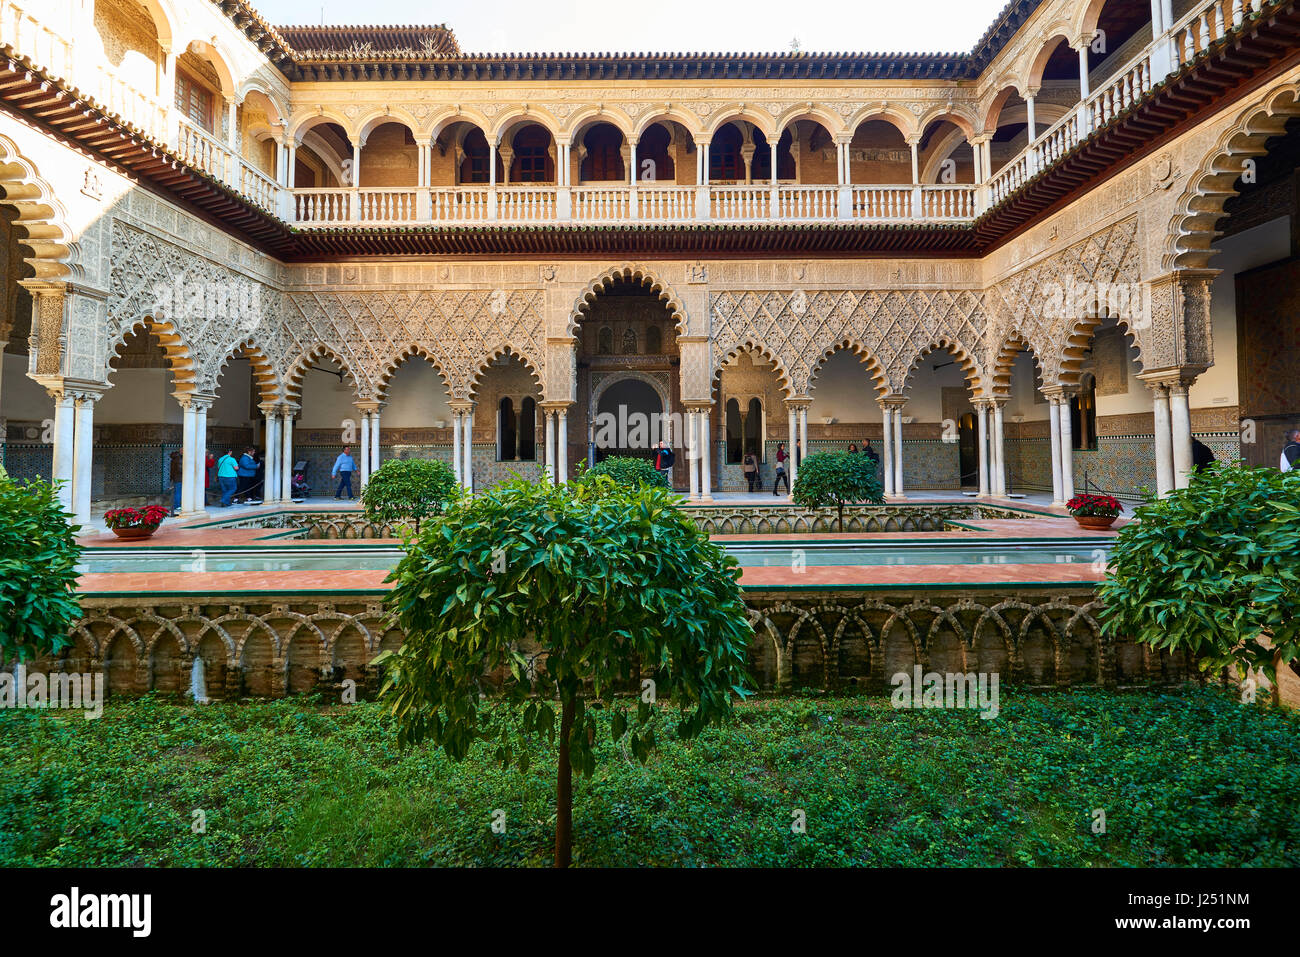 View of the Medieval garden and courtyard, the Patio de las Doncellas, of the Royal Palace, Sevilla, Spain, Europe Stock Photo